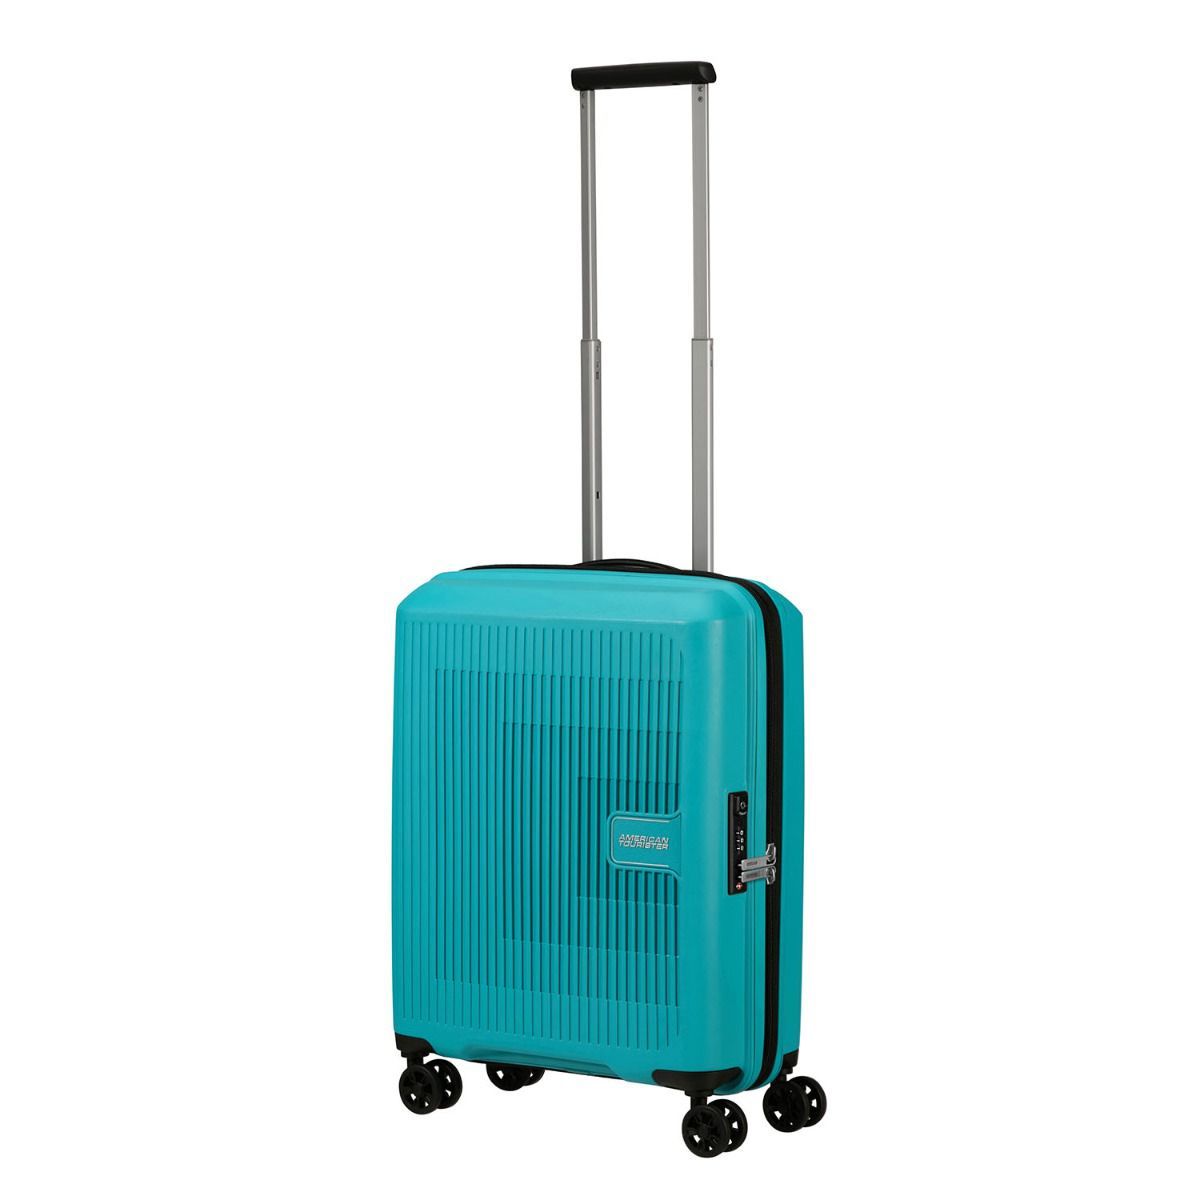 American Tourister Aerostep Turquoise Tonic Trolley S 55 cm